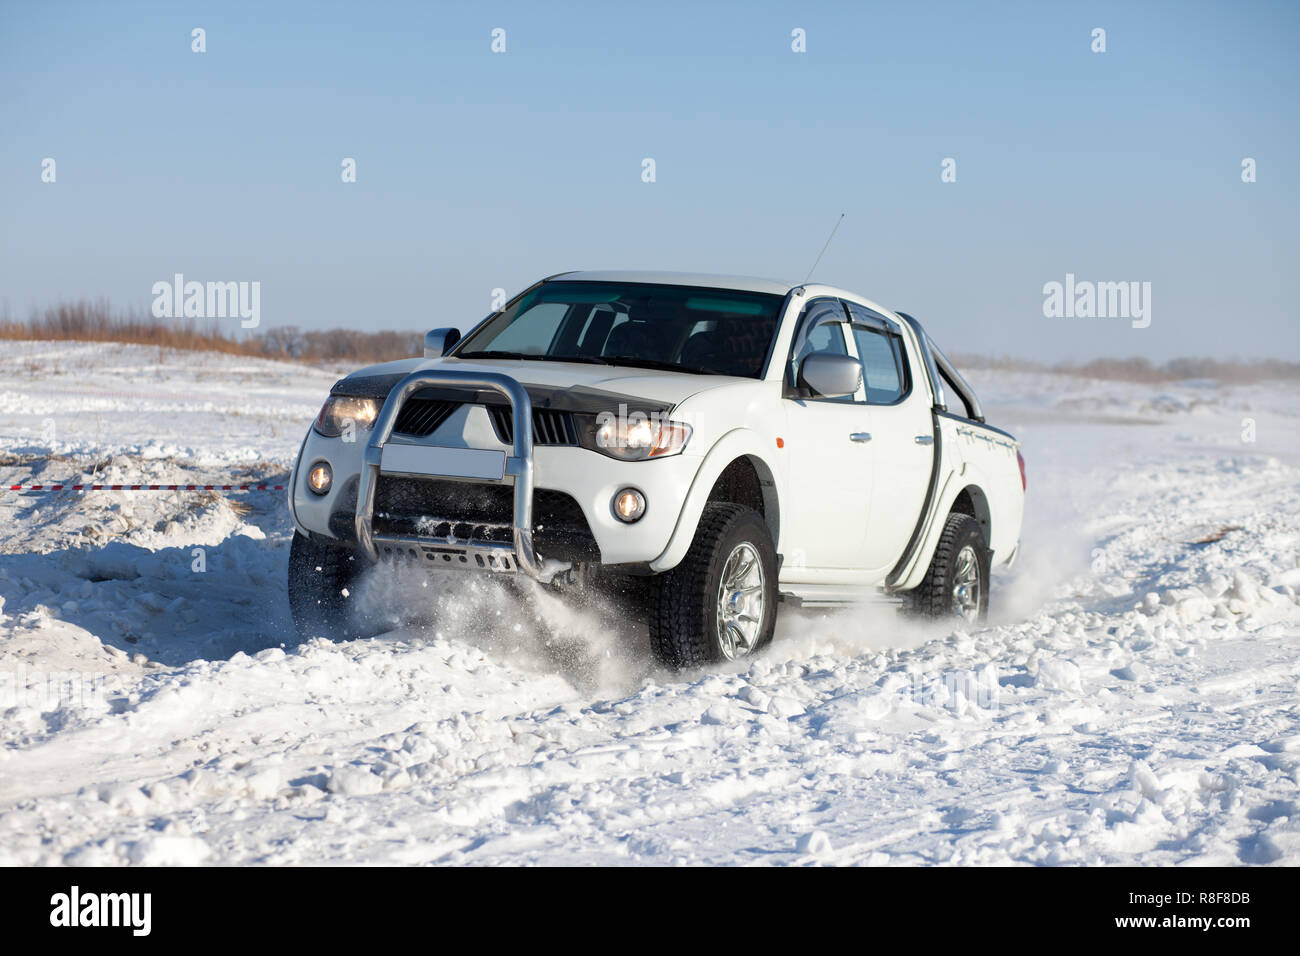 Download Mitsubishi Pick Up Truck High Resolution Stock Photography And Images Alamy Yellowimages Mockups